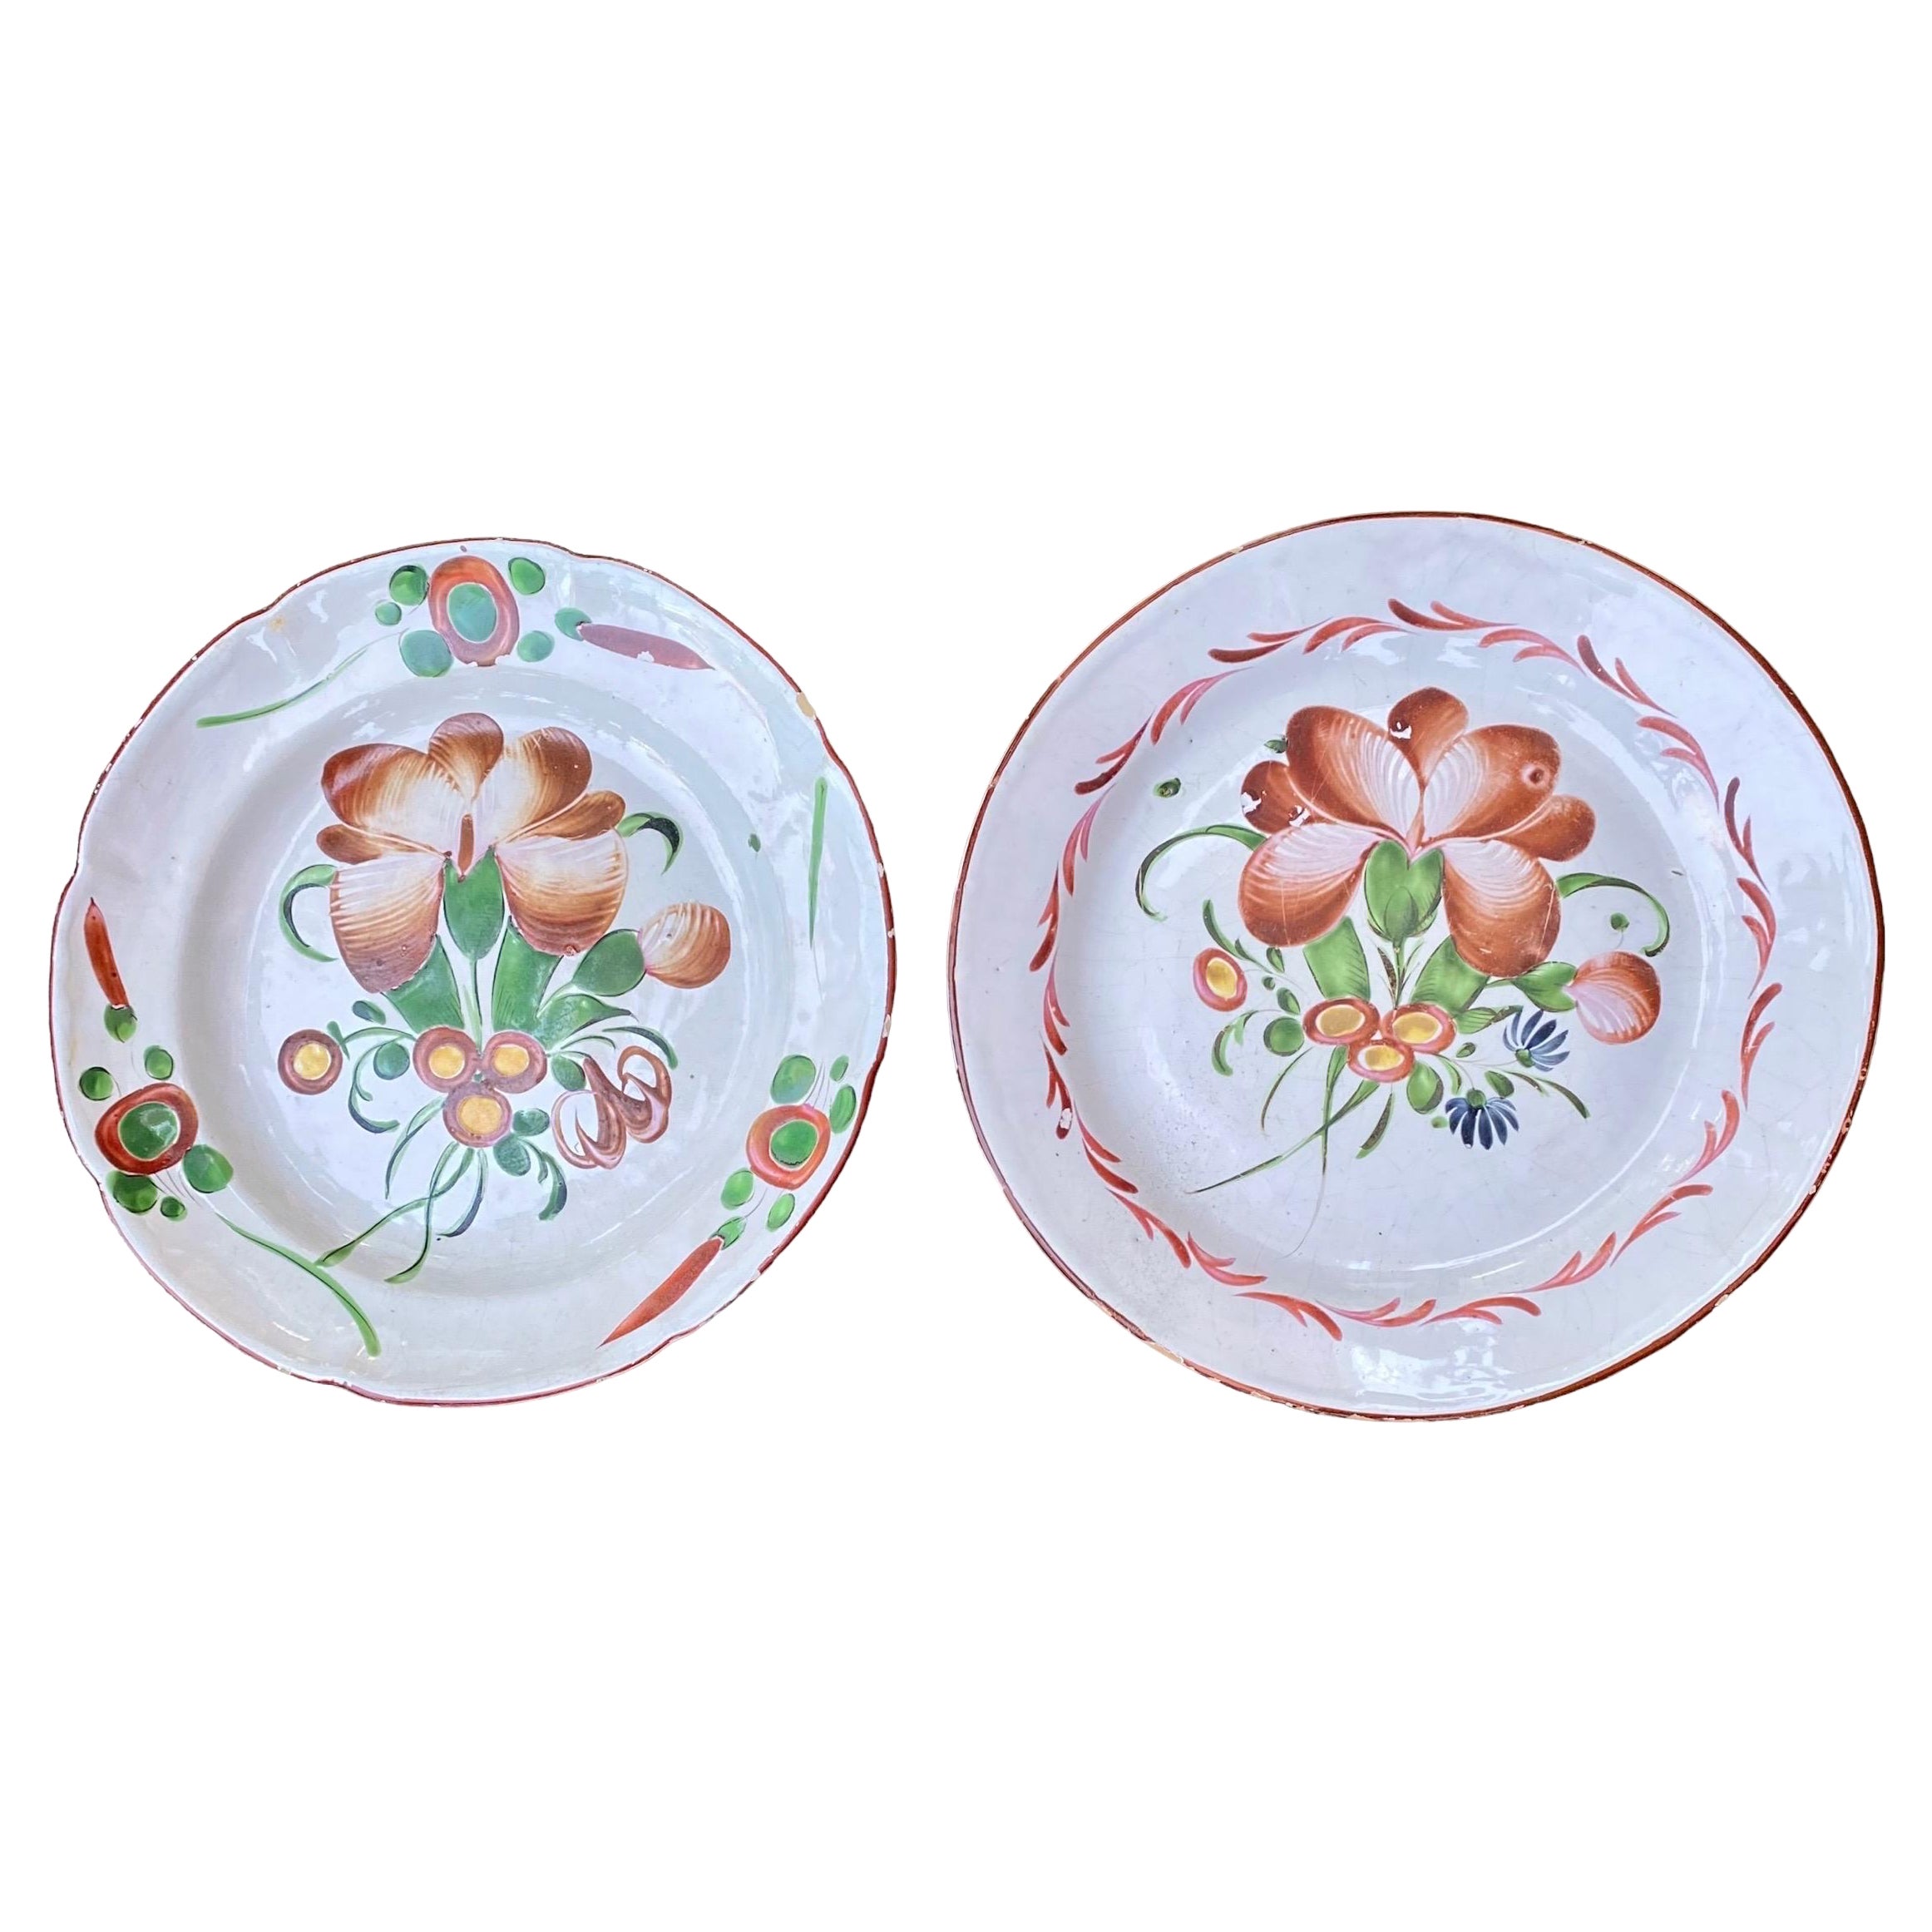 Early 19th Century French Faience Decorative Plates